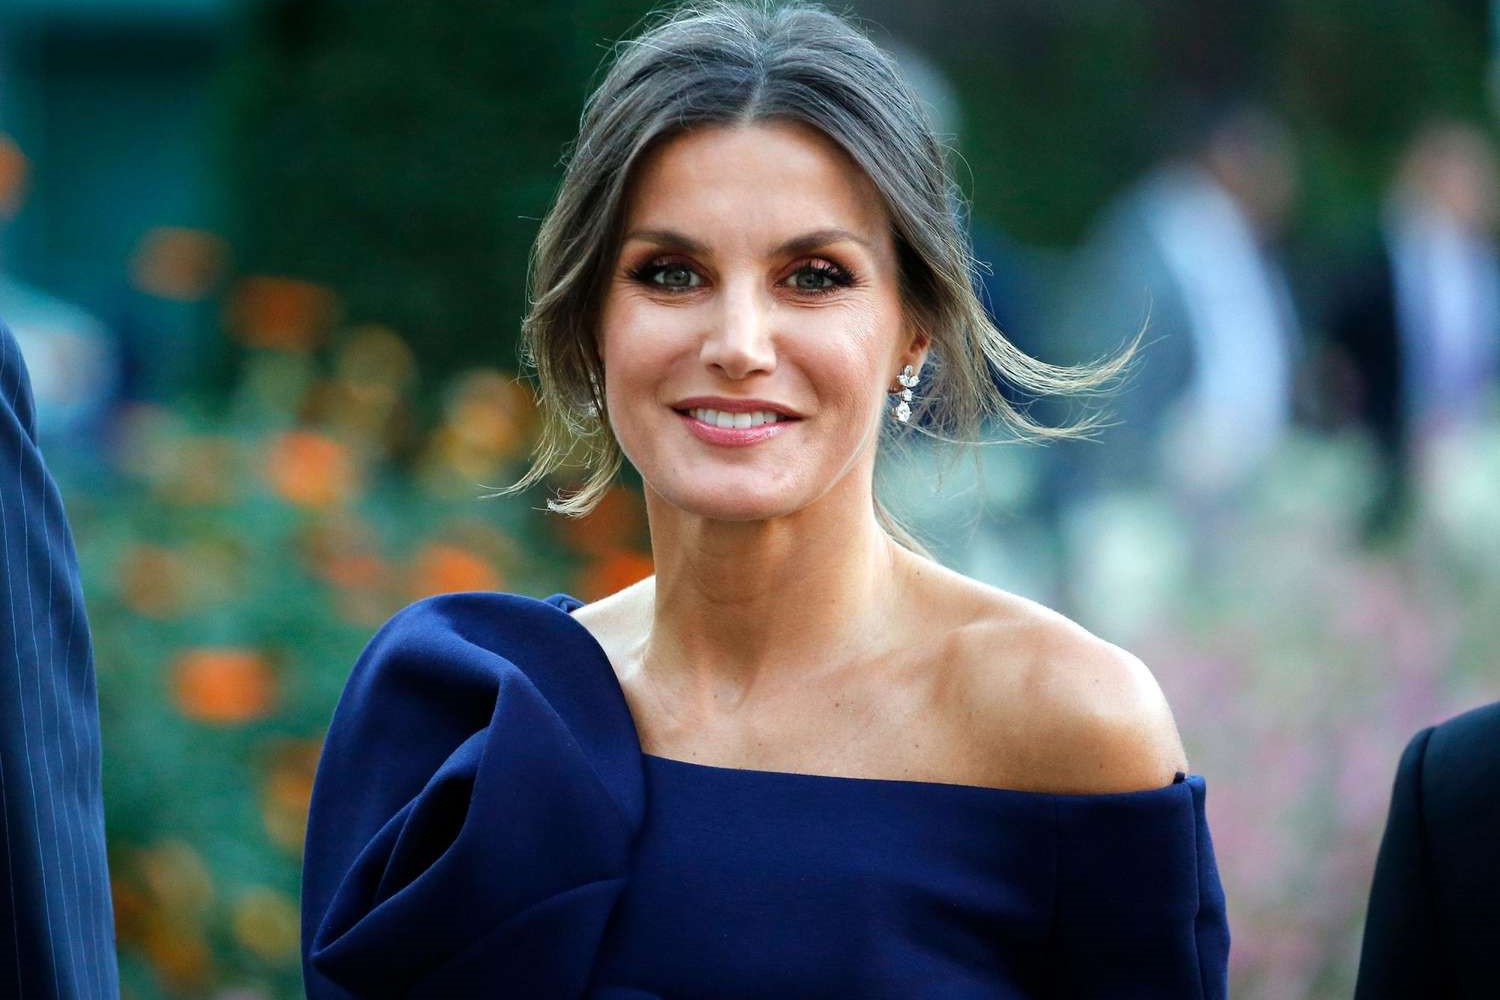 16 Mind-blowing Facts About Queen Letizia Of Spain - Facts.net